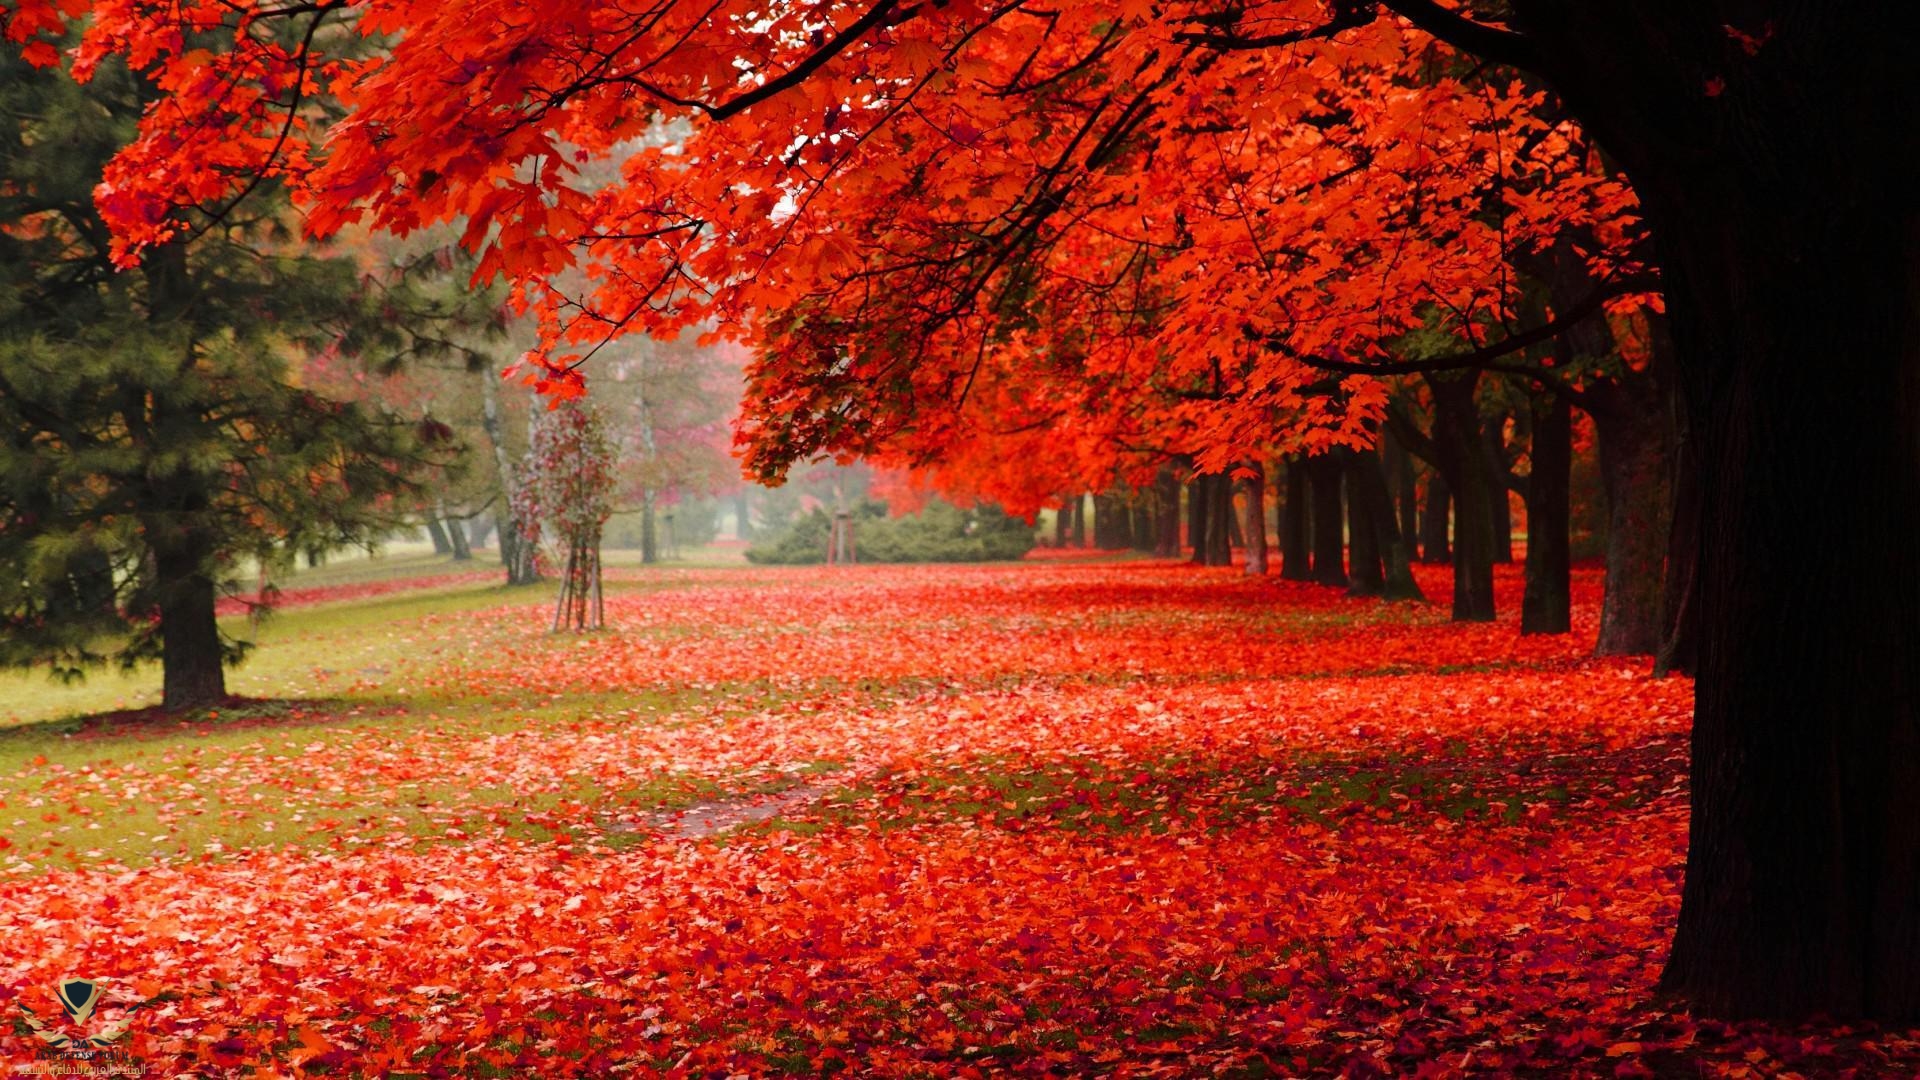 natural-park-autumn-red-leaves-autumn-scenery.jpg